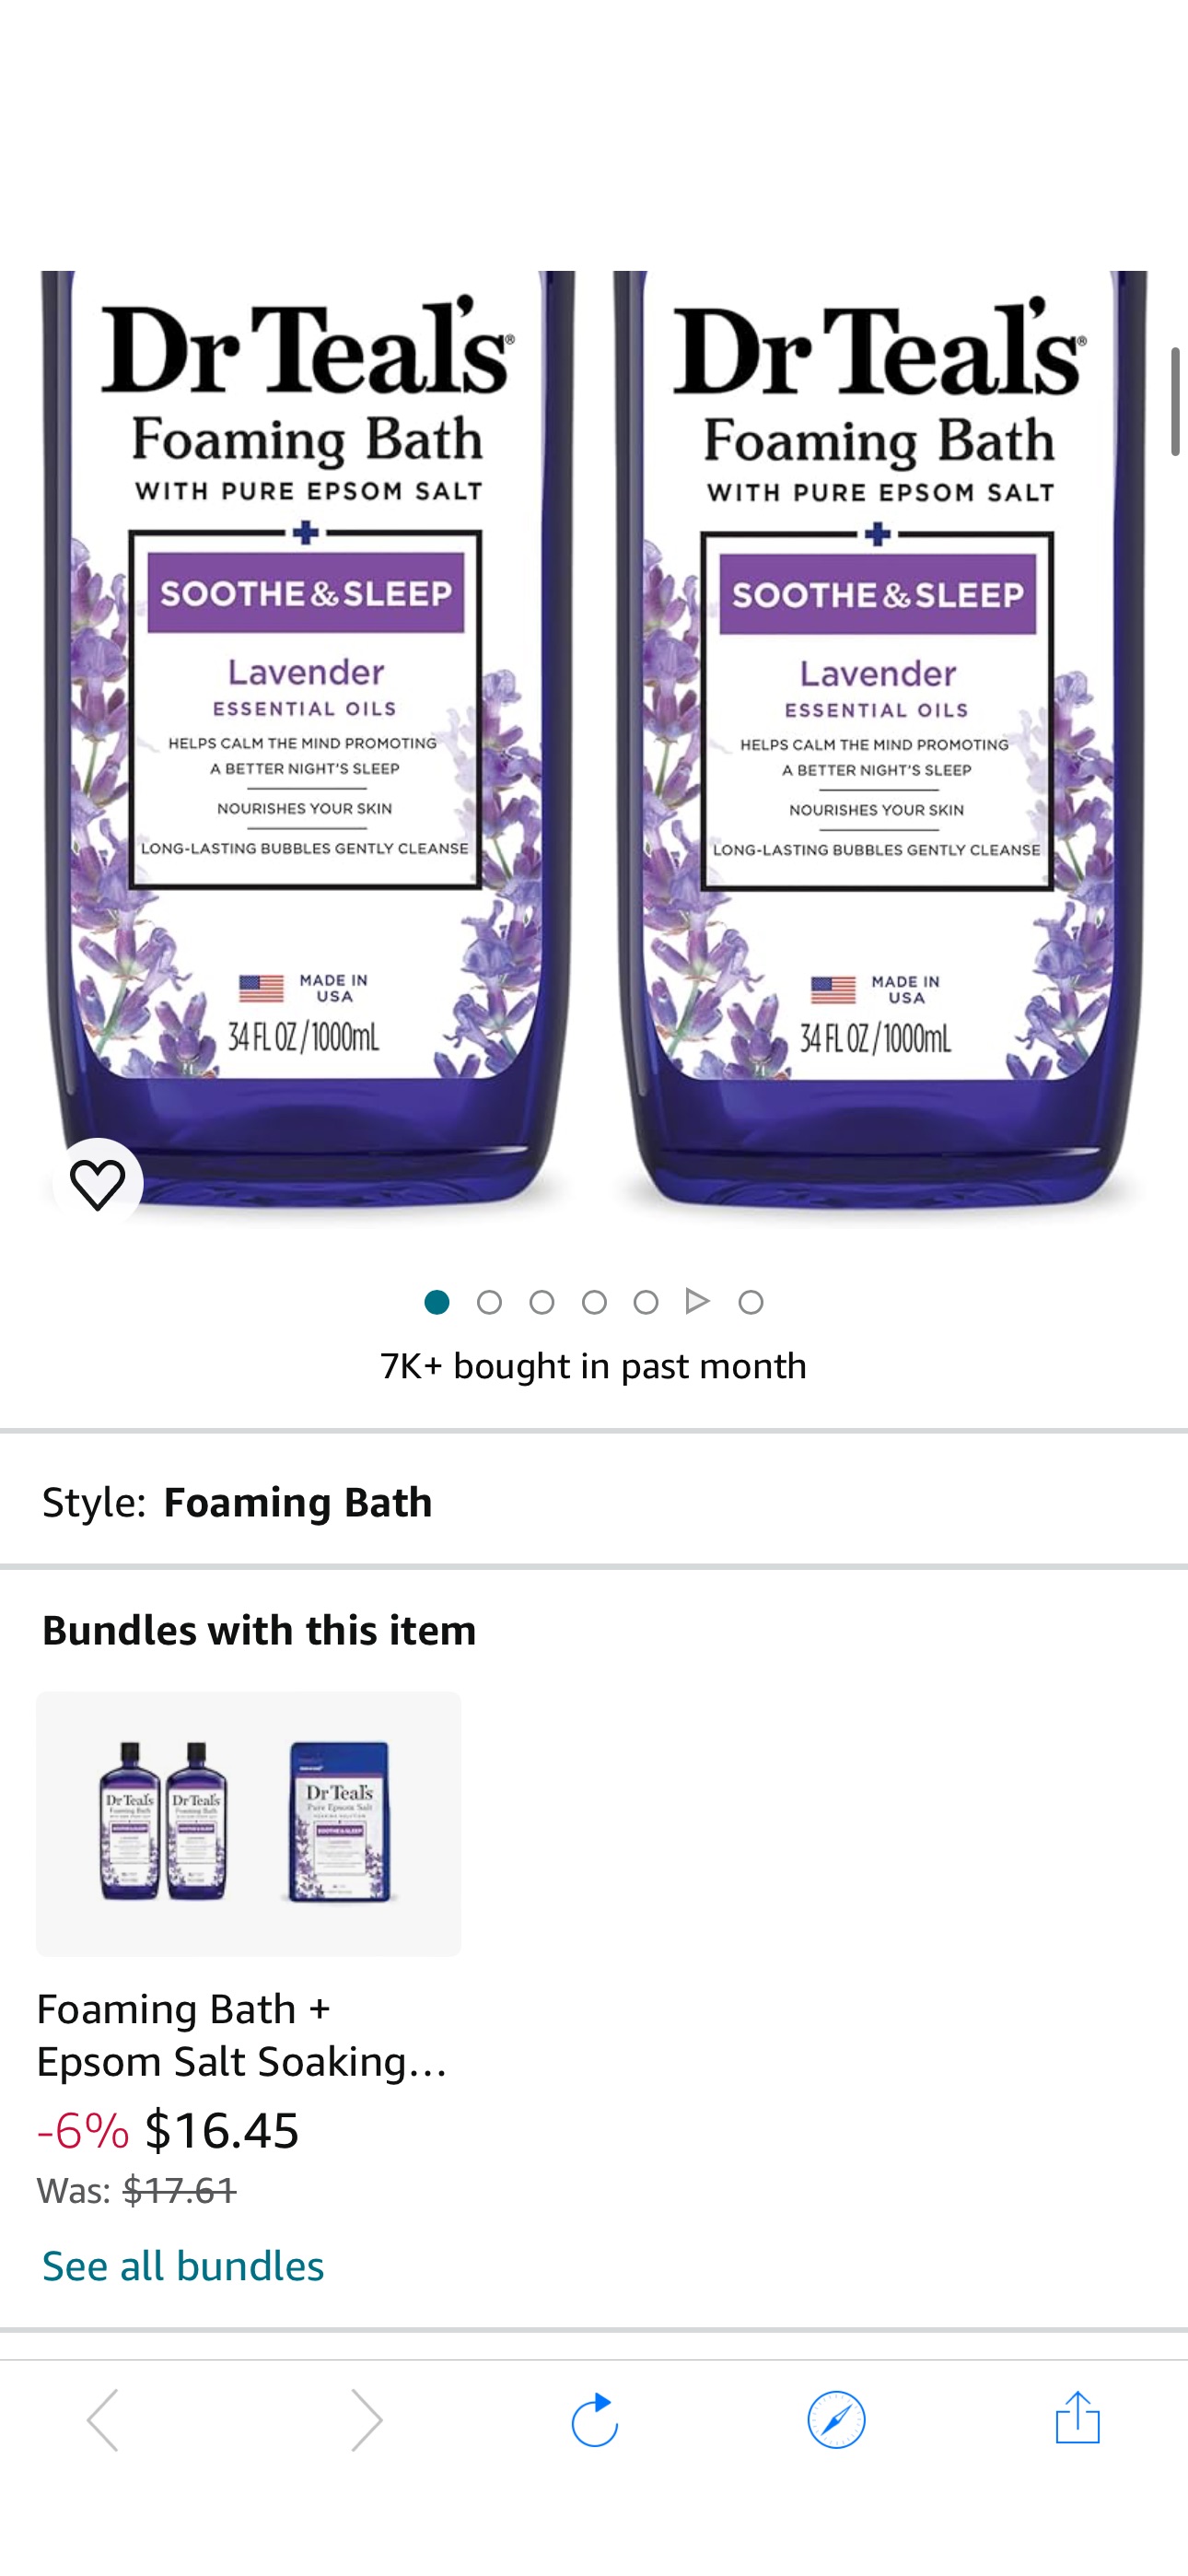 Amazon.com : Dr Teal's Foaming Bath with Pure Epsom Salt, Soothe & Sleep with Lavender, 34 fl oz (Pack of 2) : Beauty & Personal Care